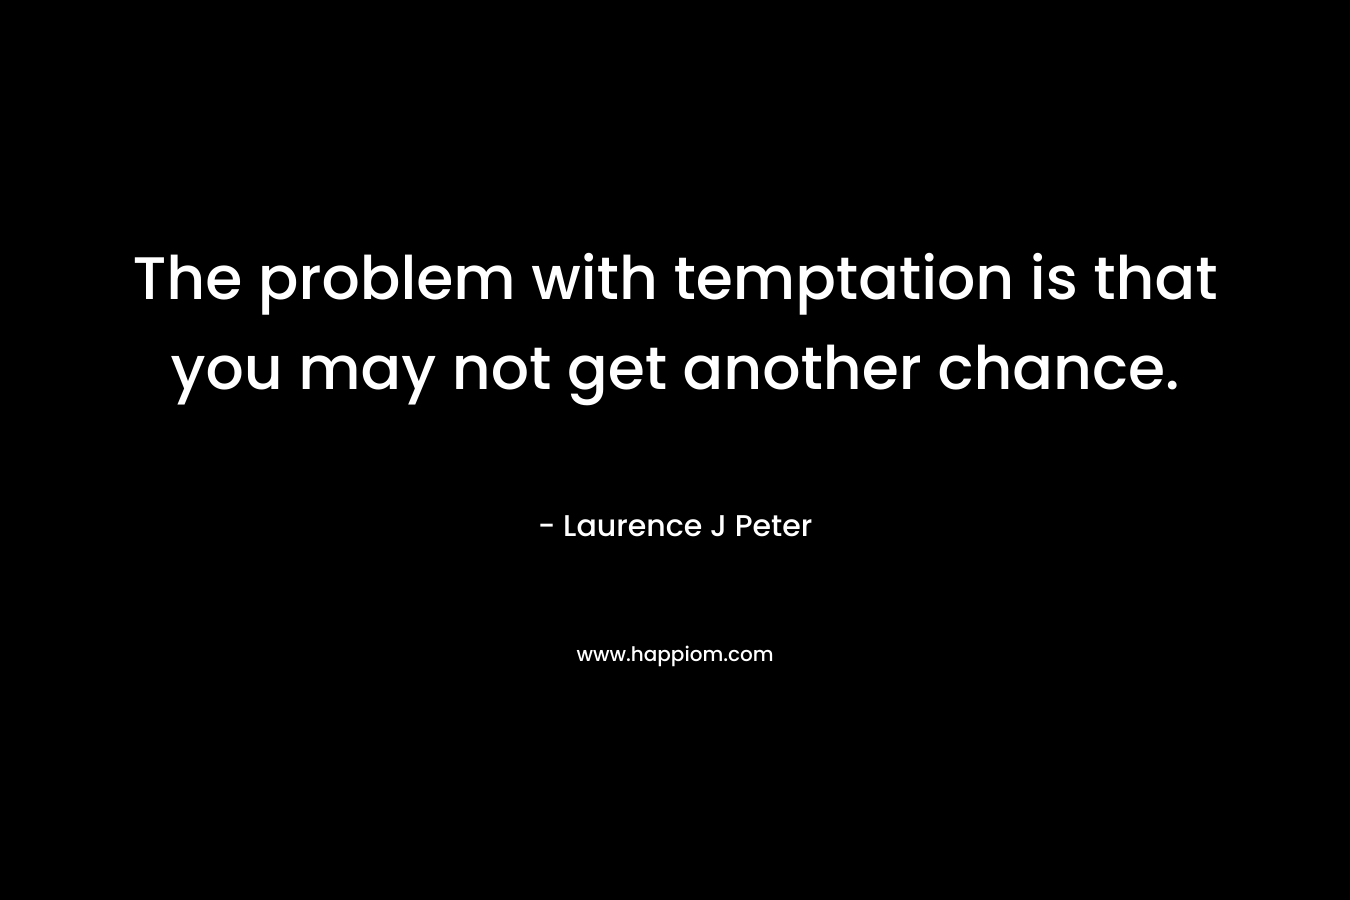 The problem with temptation is that you may not get another chance. – Laurence J Peter